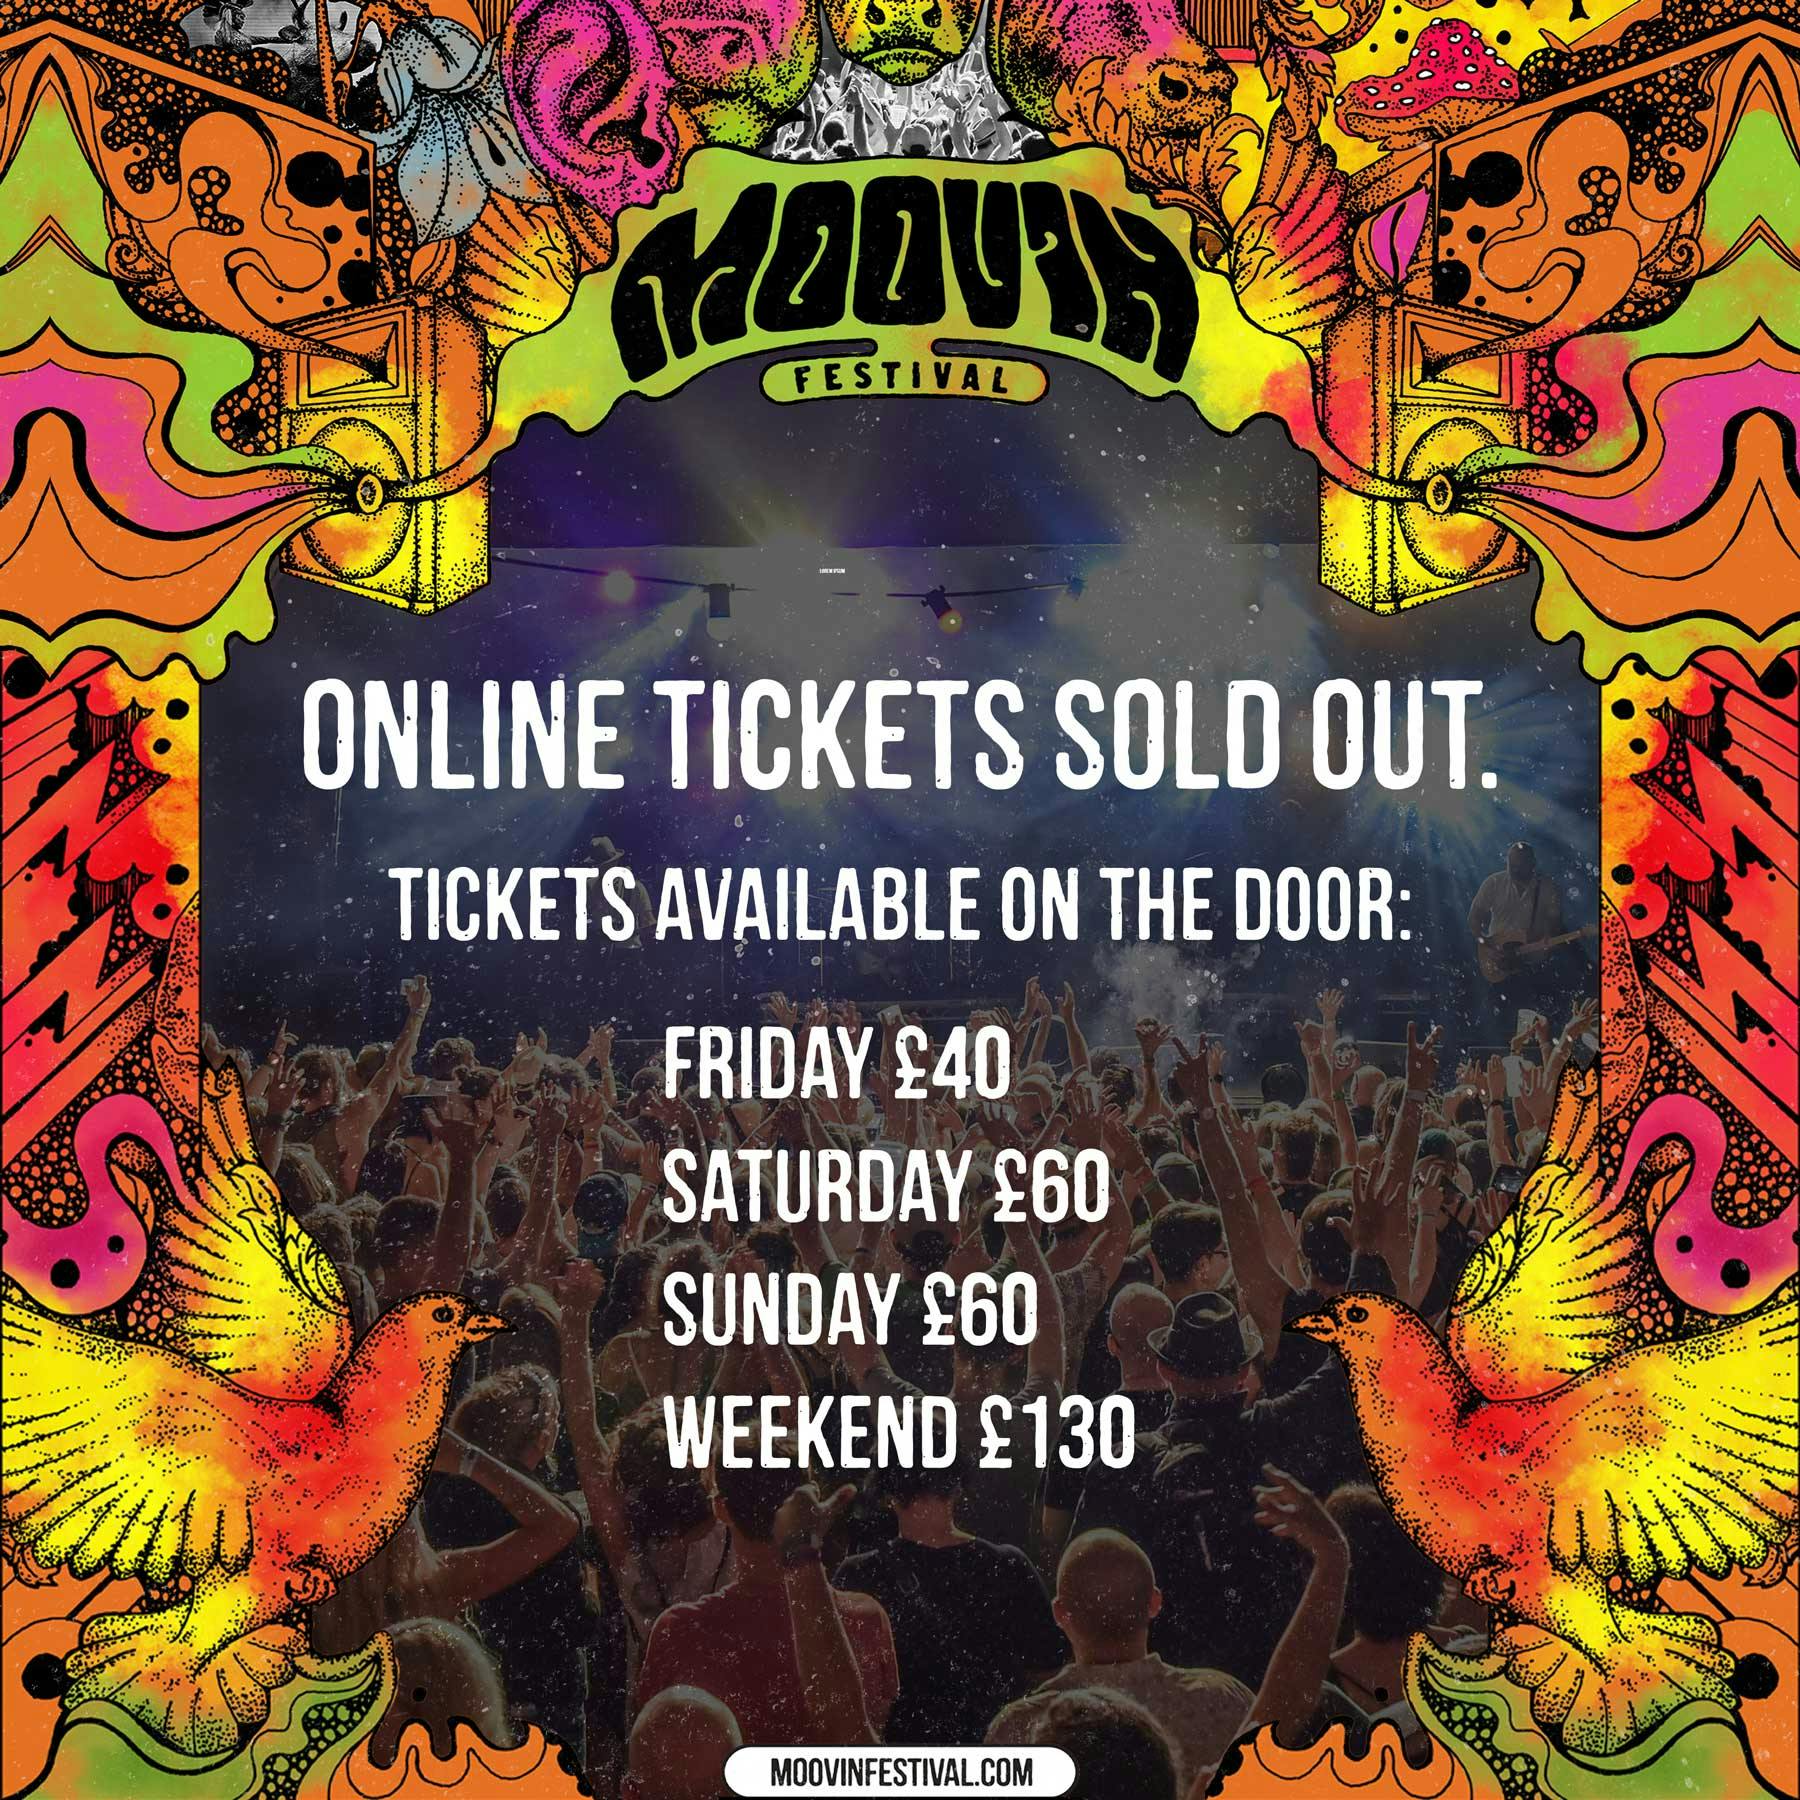 Online tickets sold out!